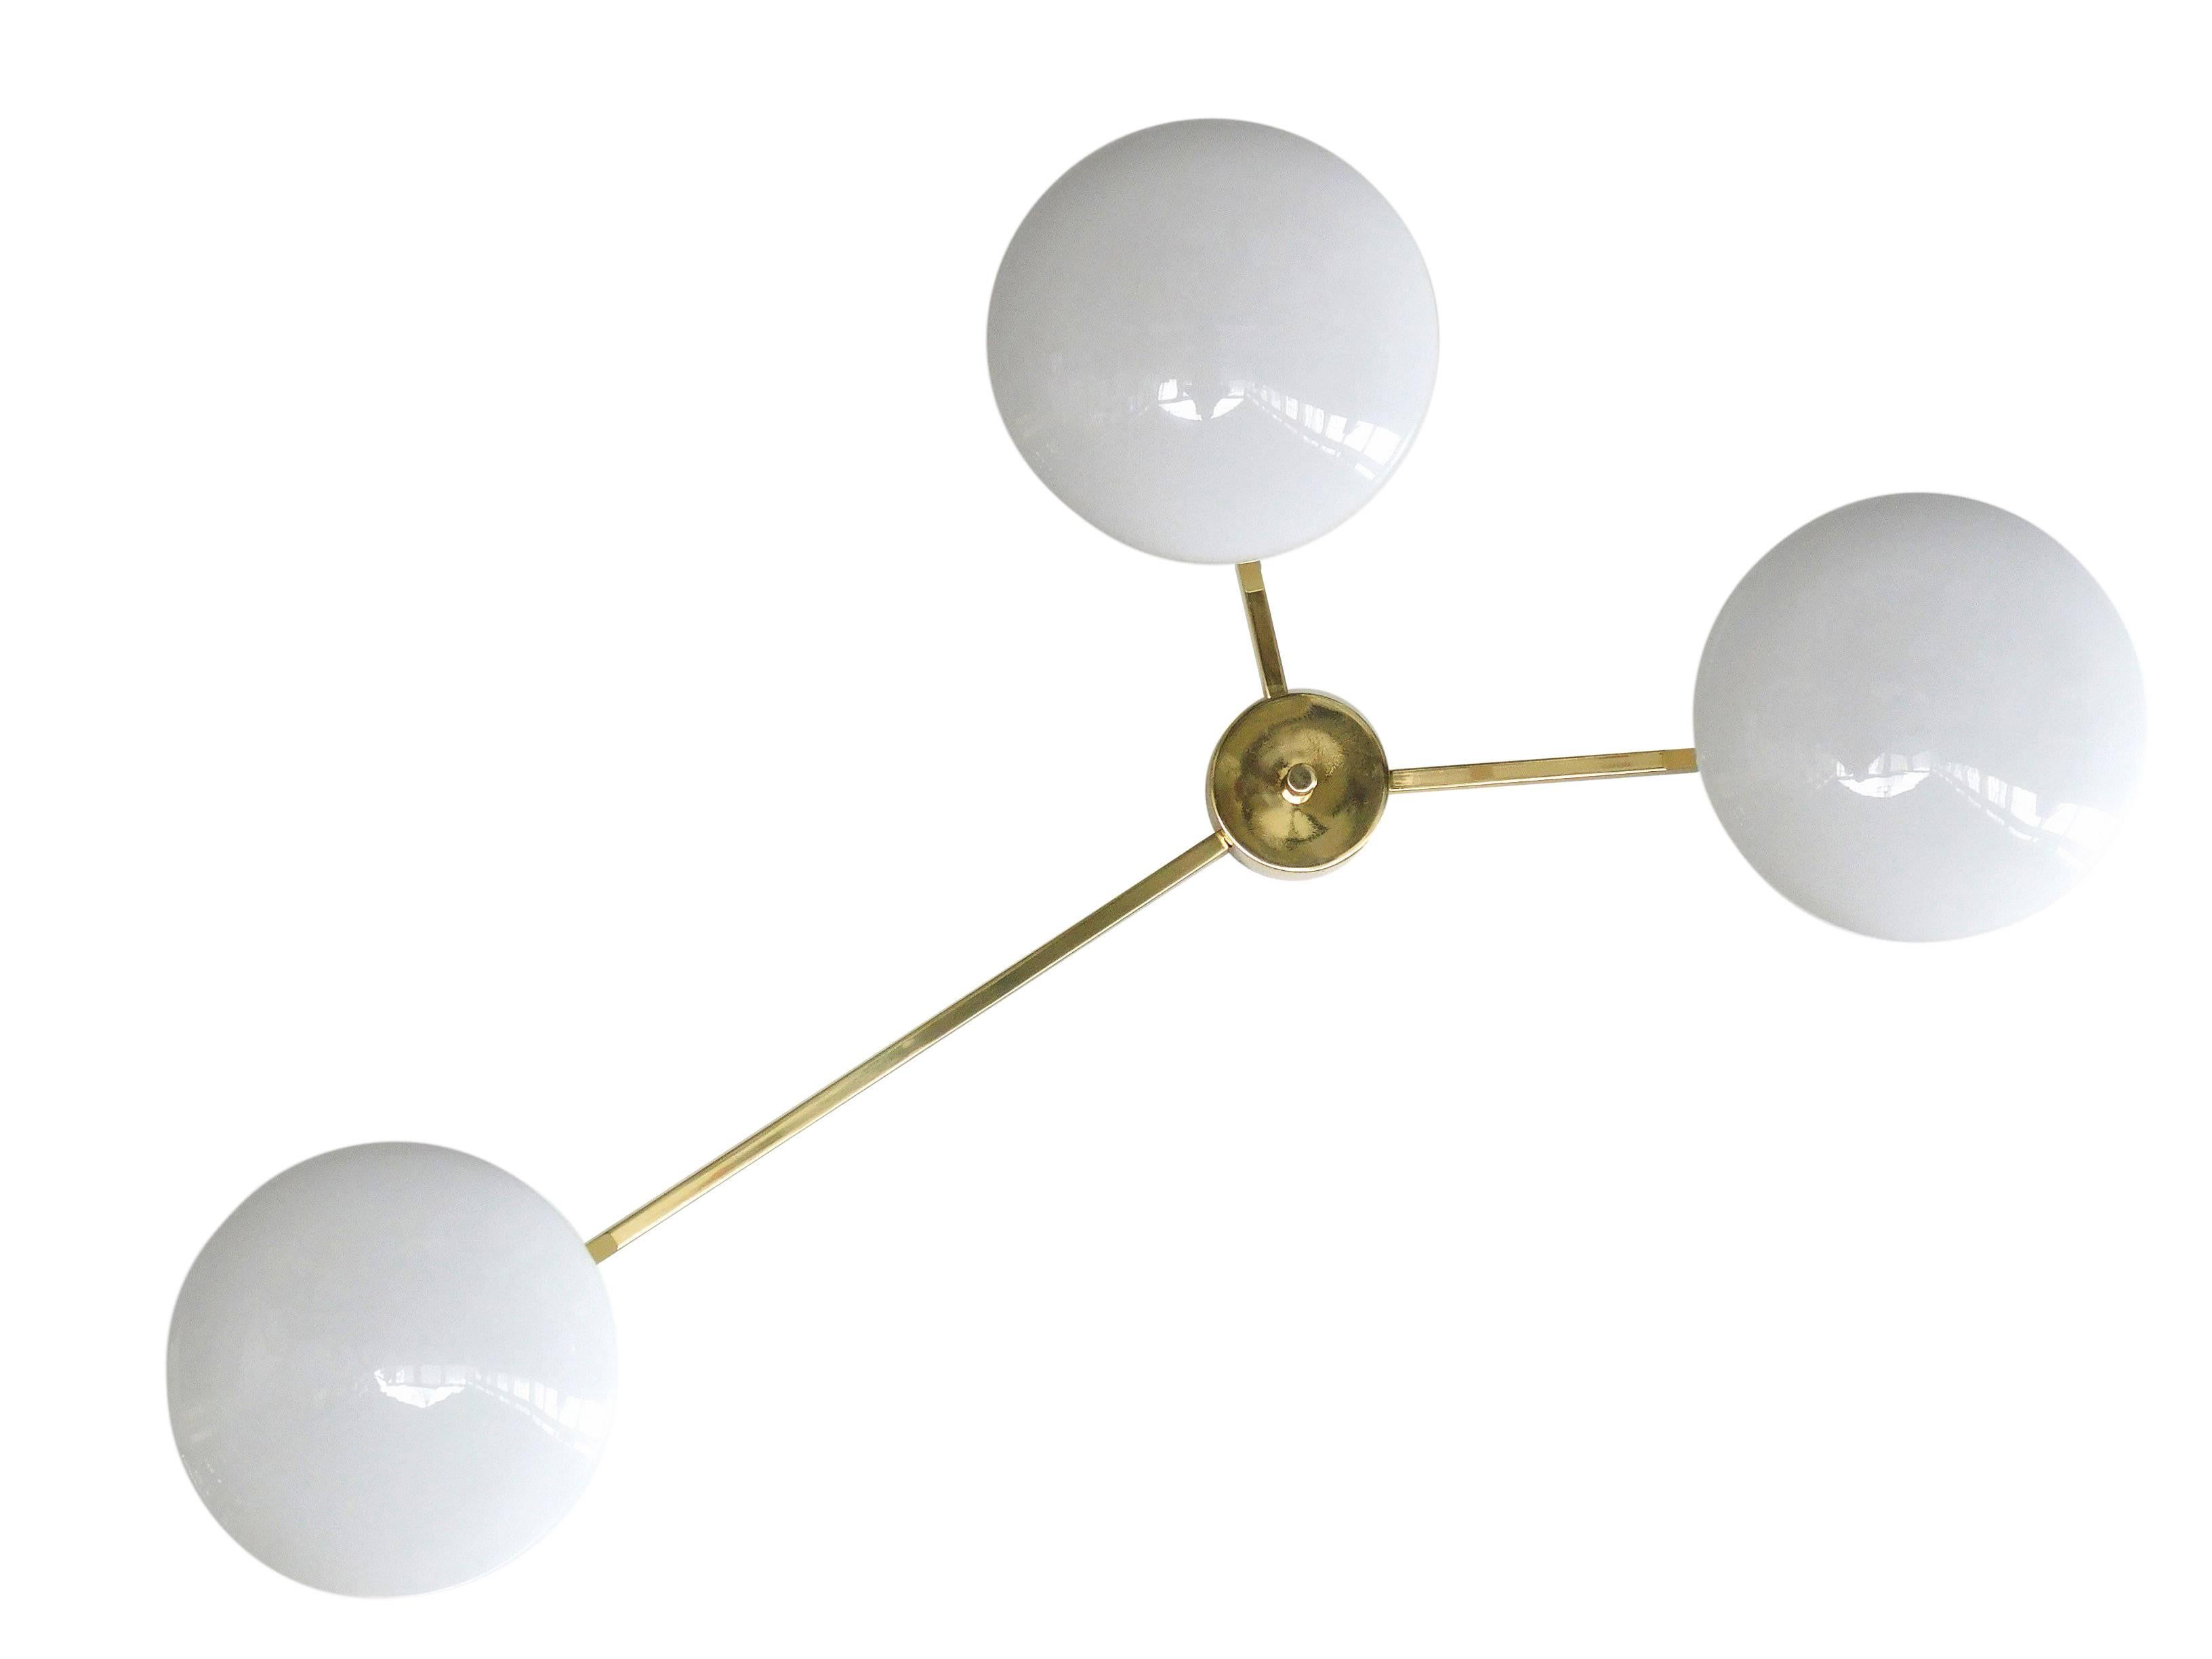 Italian midcentury flush mount with 3 glossy white Murano glass shades mounted on solid brass frame in polished brass frame / Made in Italy
3 lights / E12 or E14 type / max 40W each
Measures: Length: 53.5 inches / Width: 30.75 inches / Height: 7.5